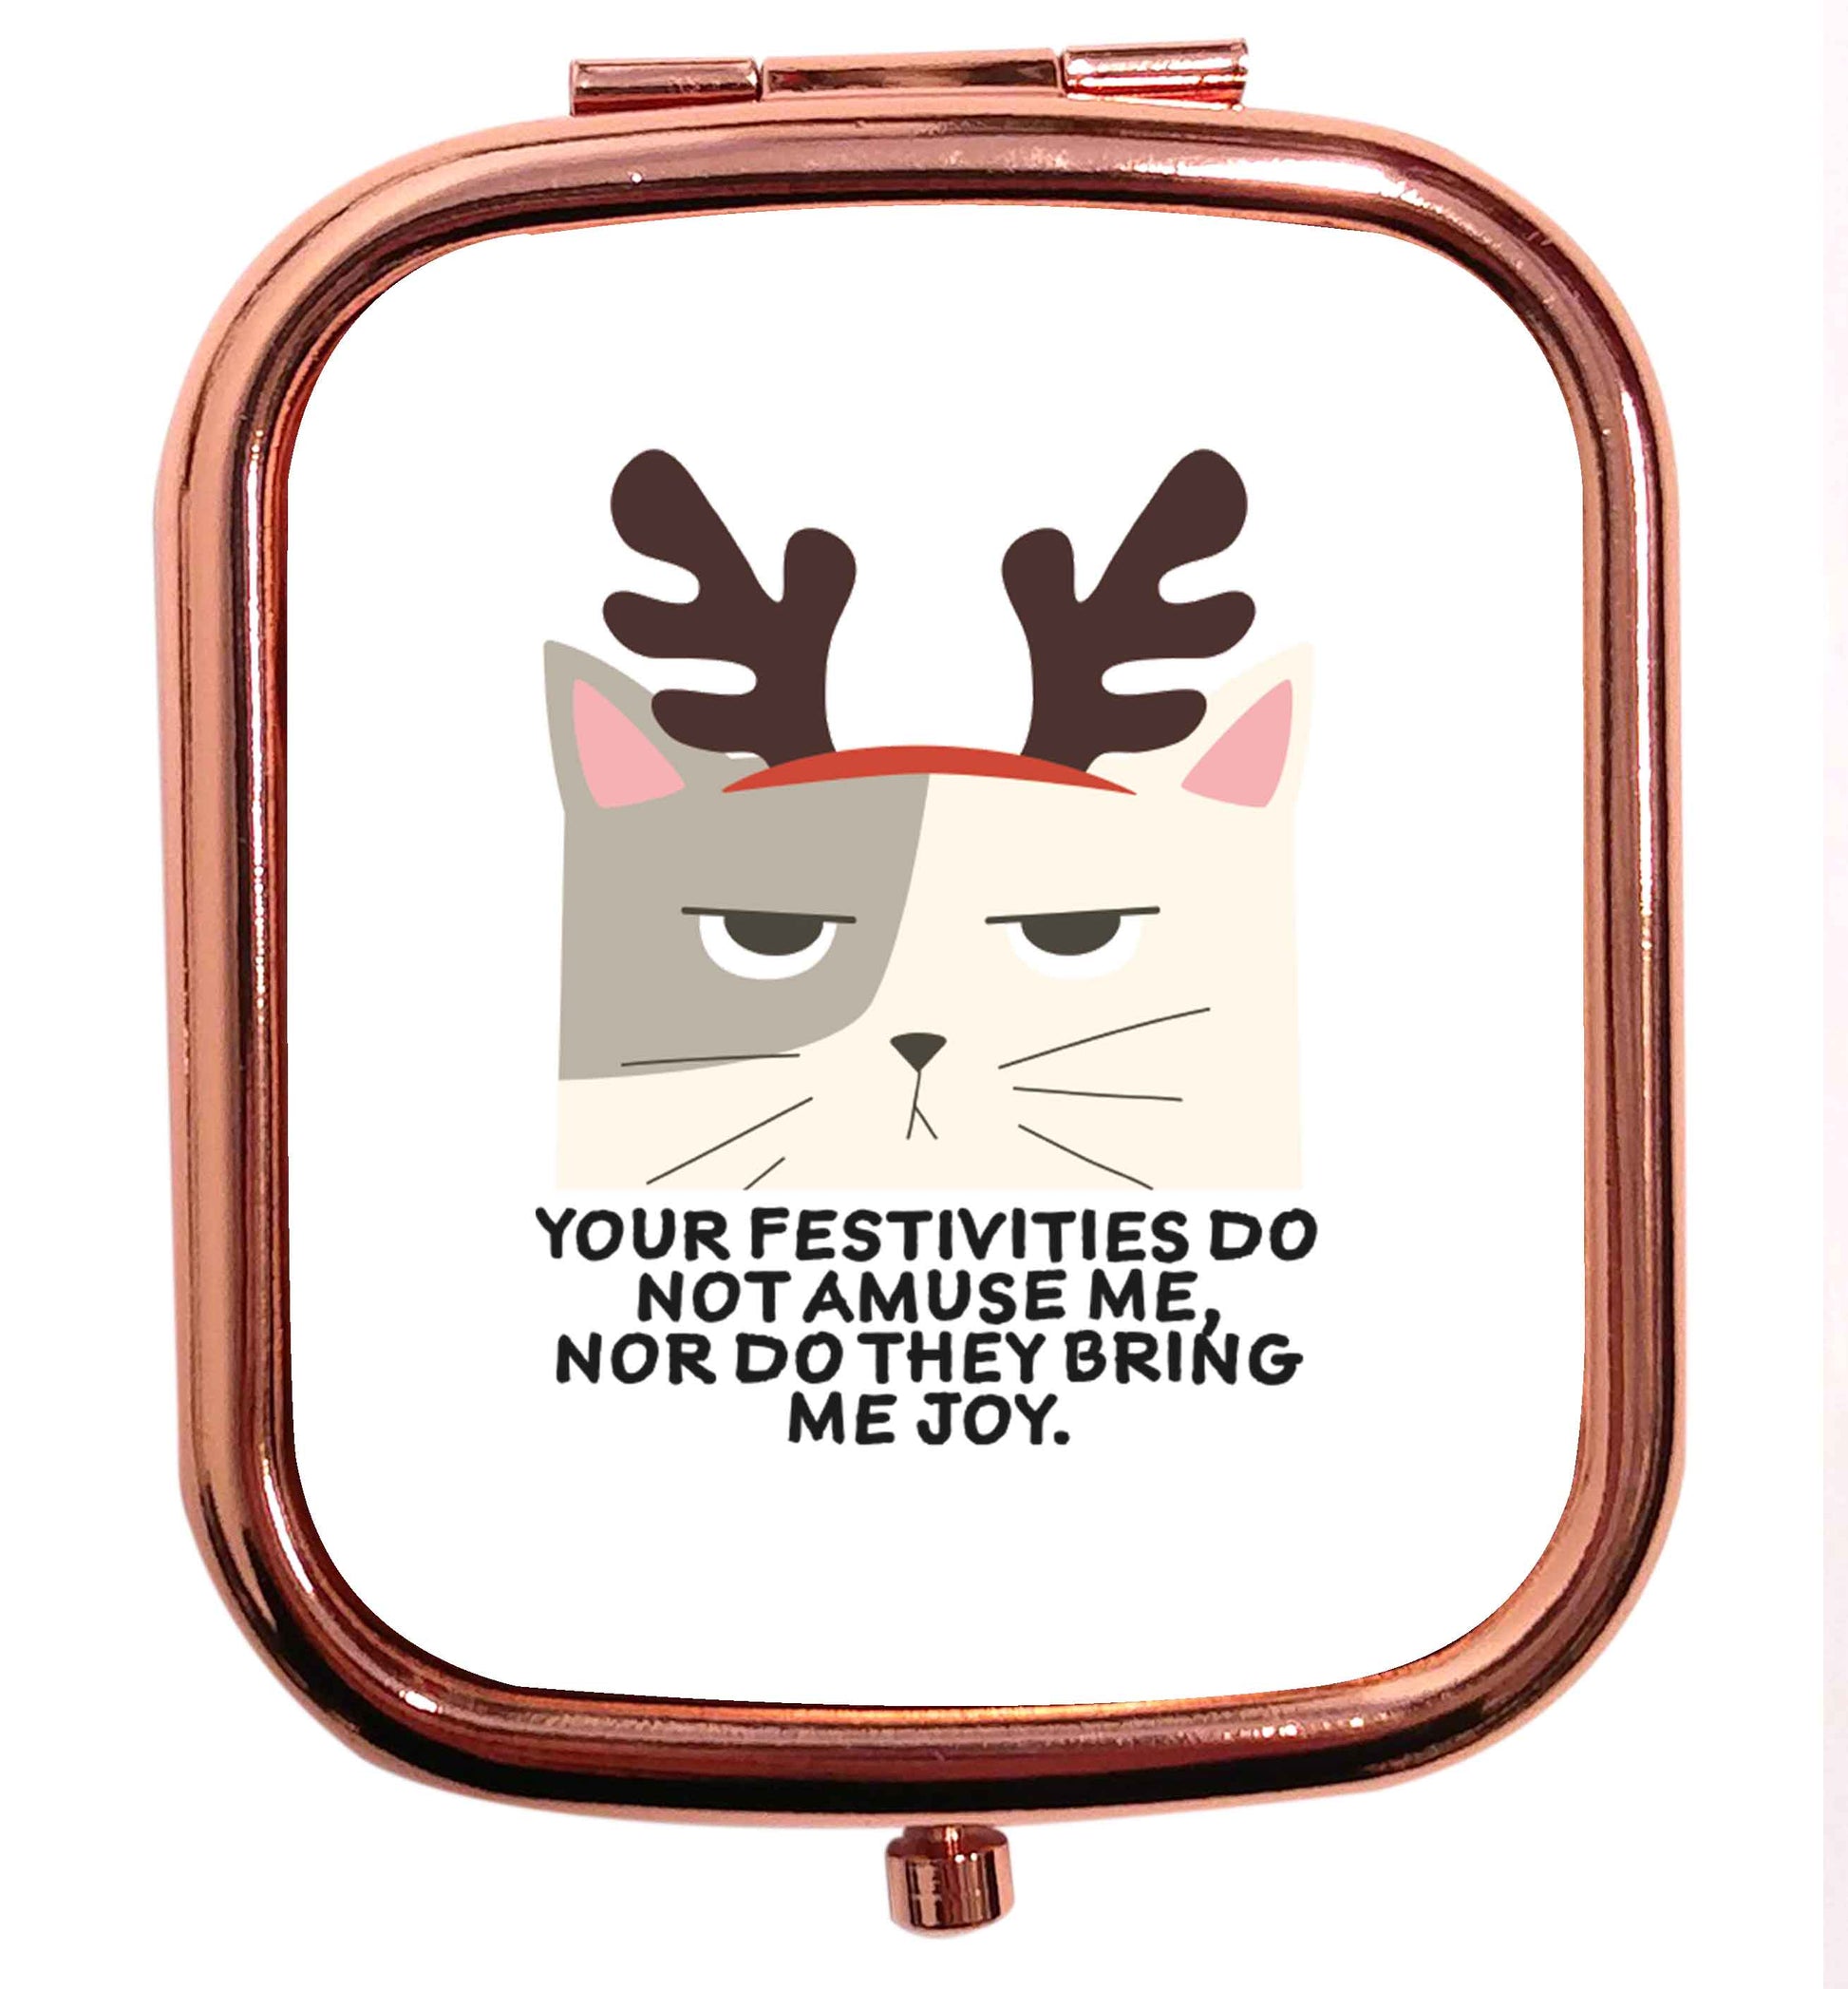 Your festivities do not amuse me nor do they bring me joy rose gold square pocket mirror